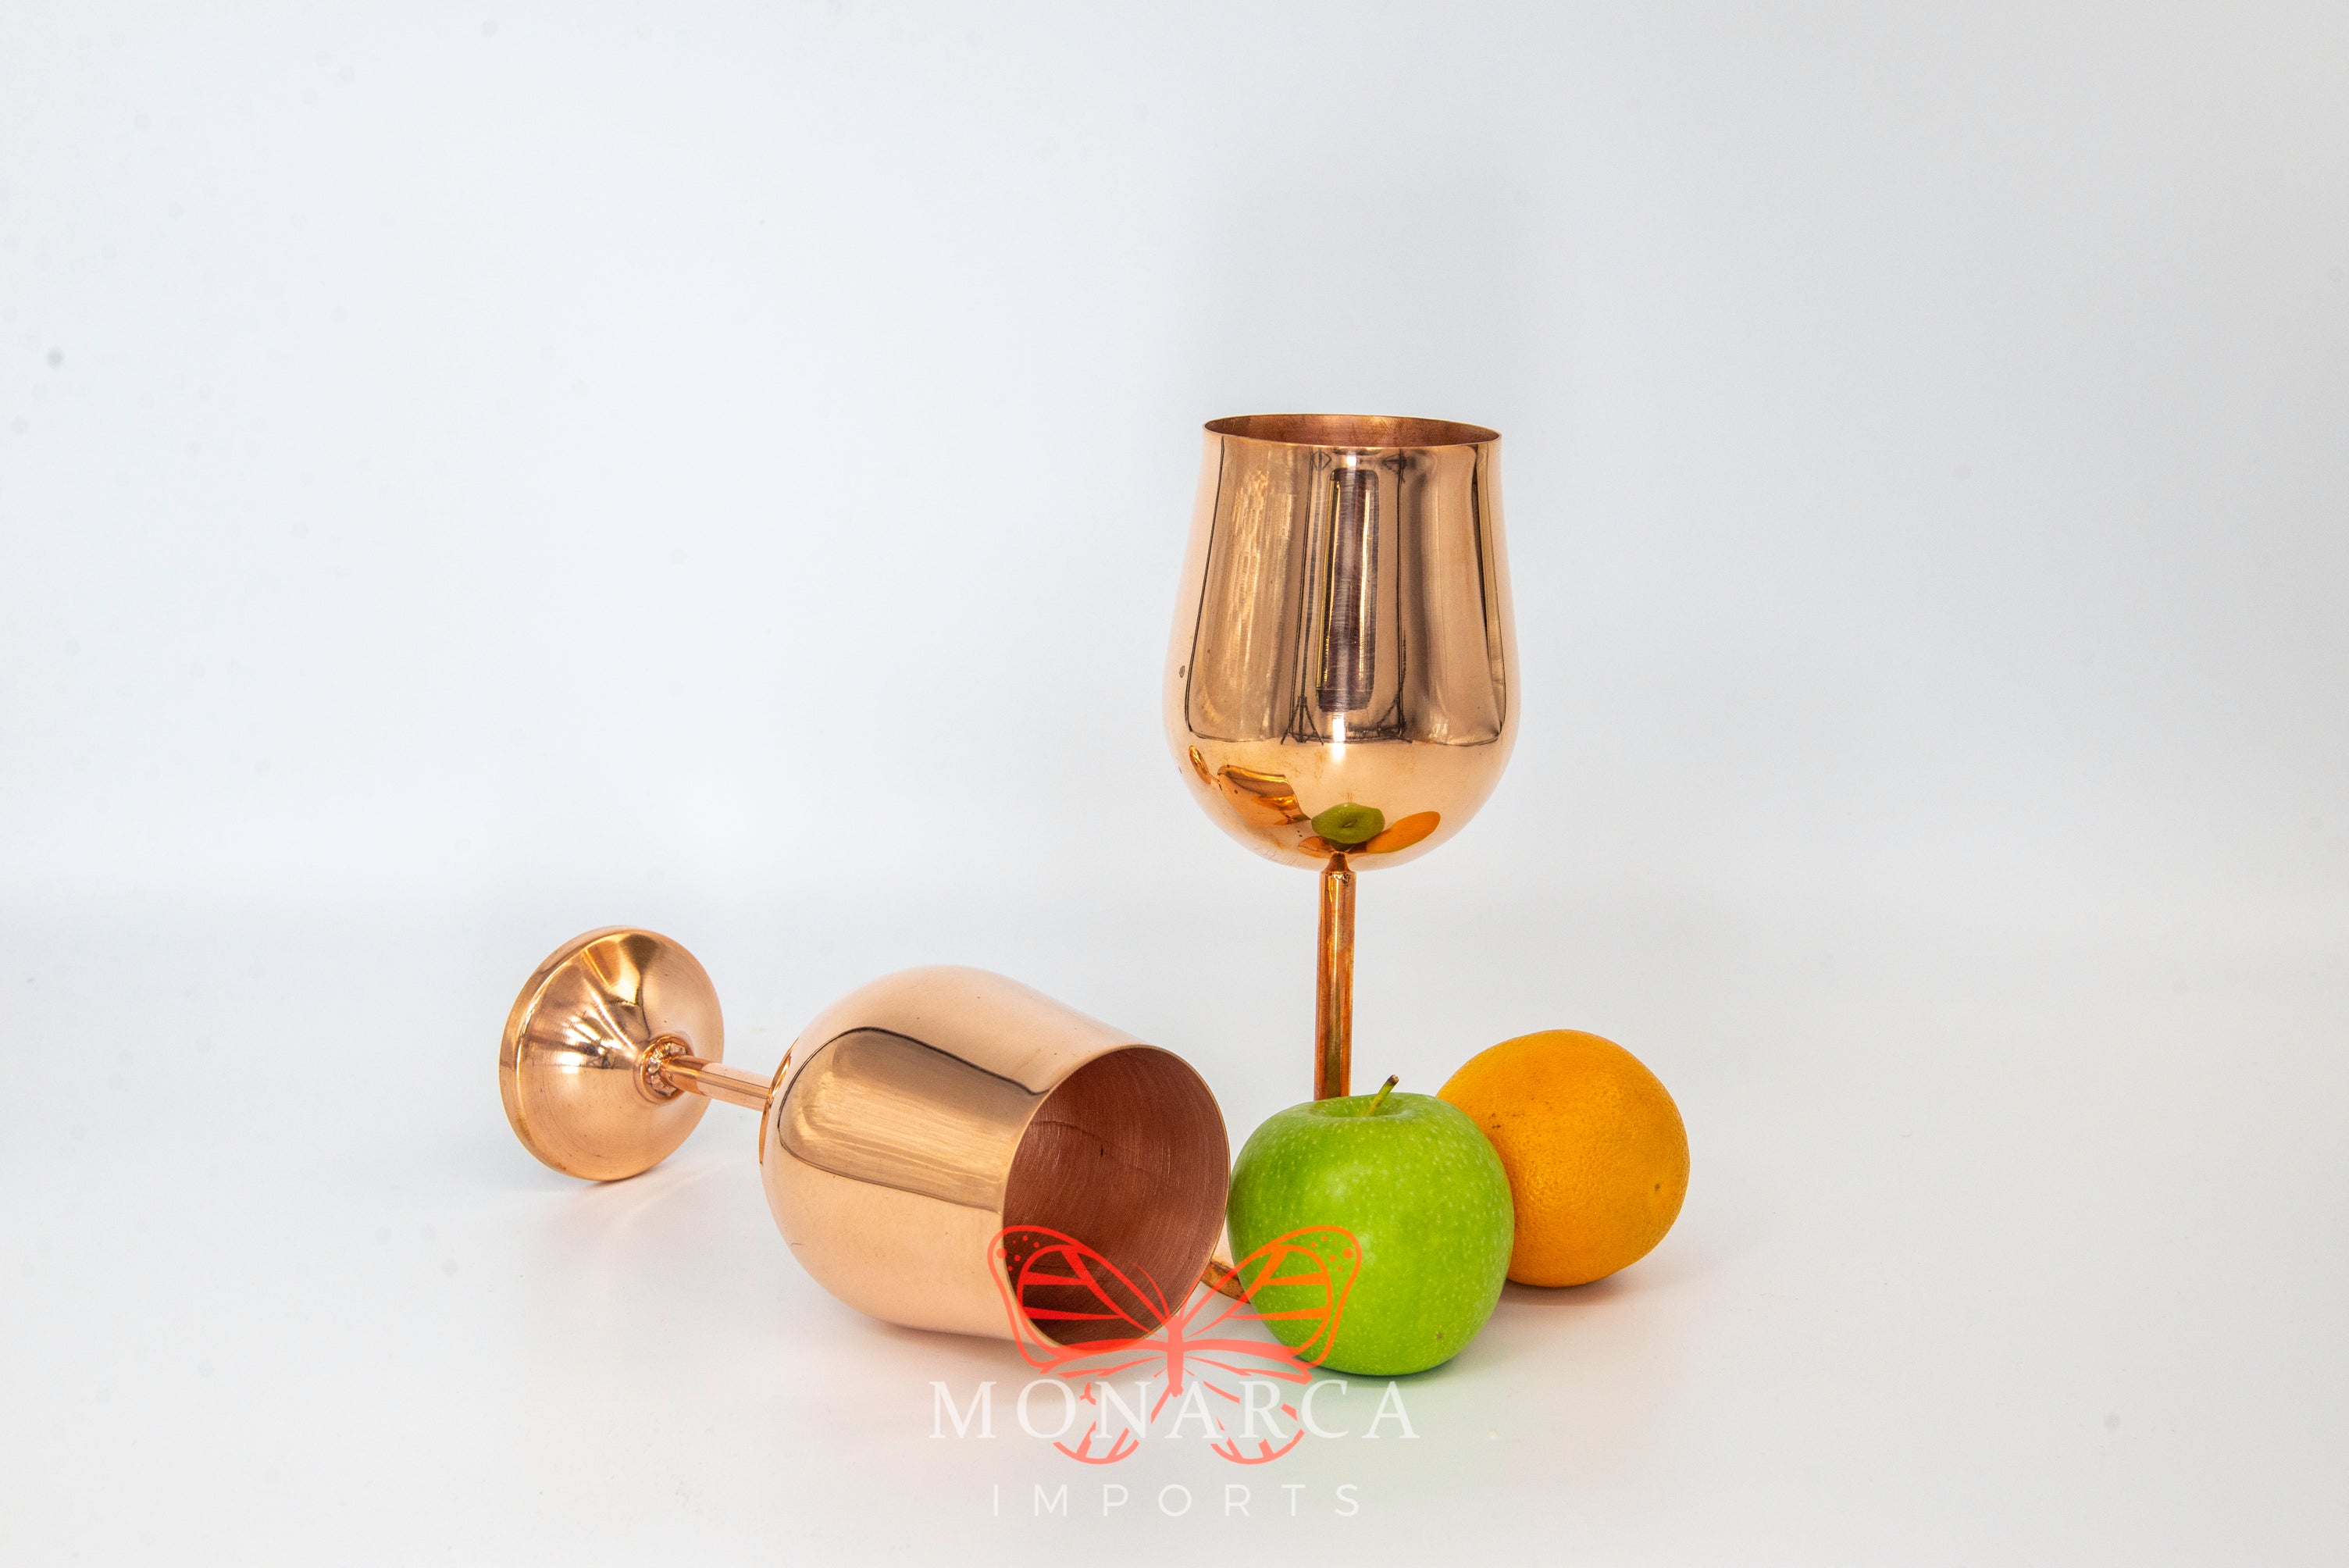 Wine glasses set of 2 made of stainless steel copper, metal wine